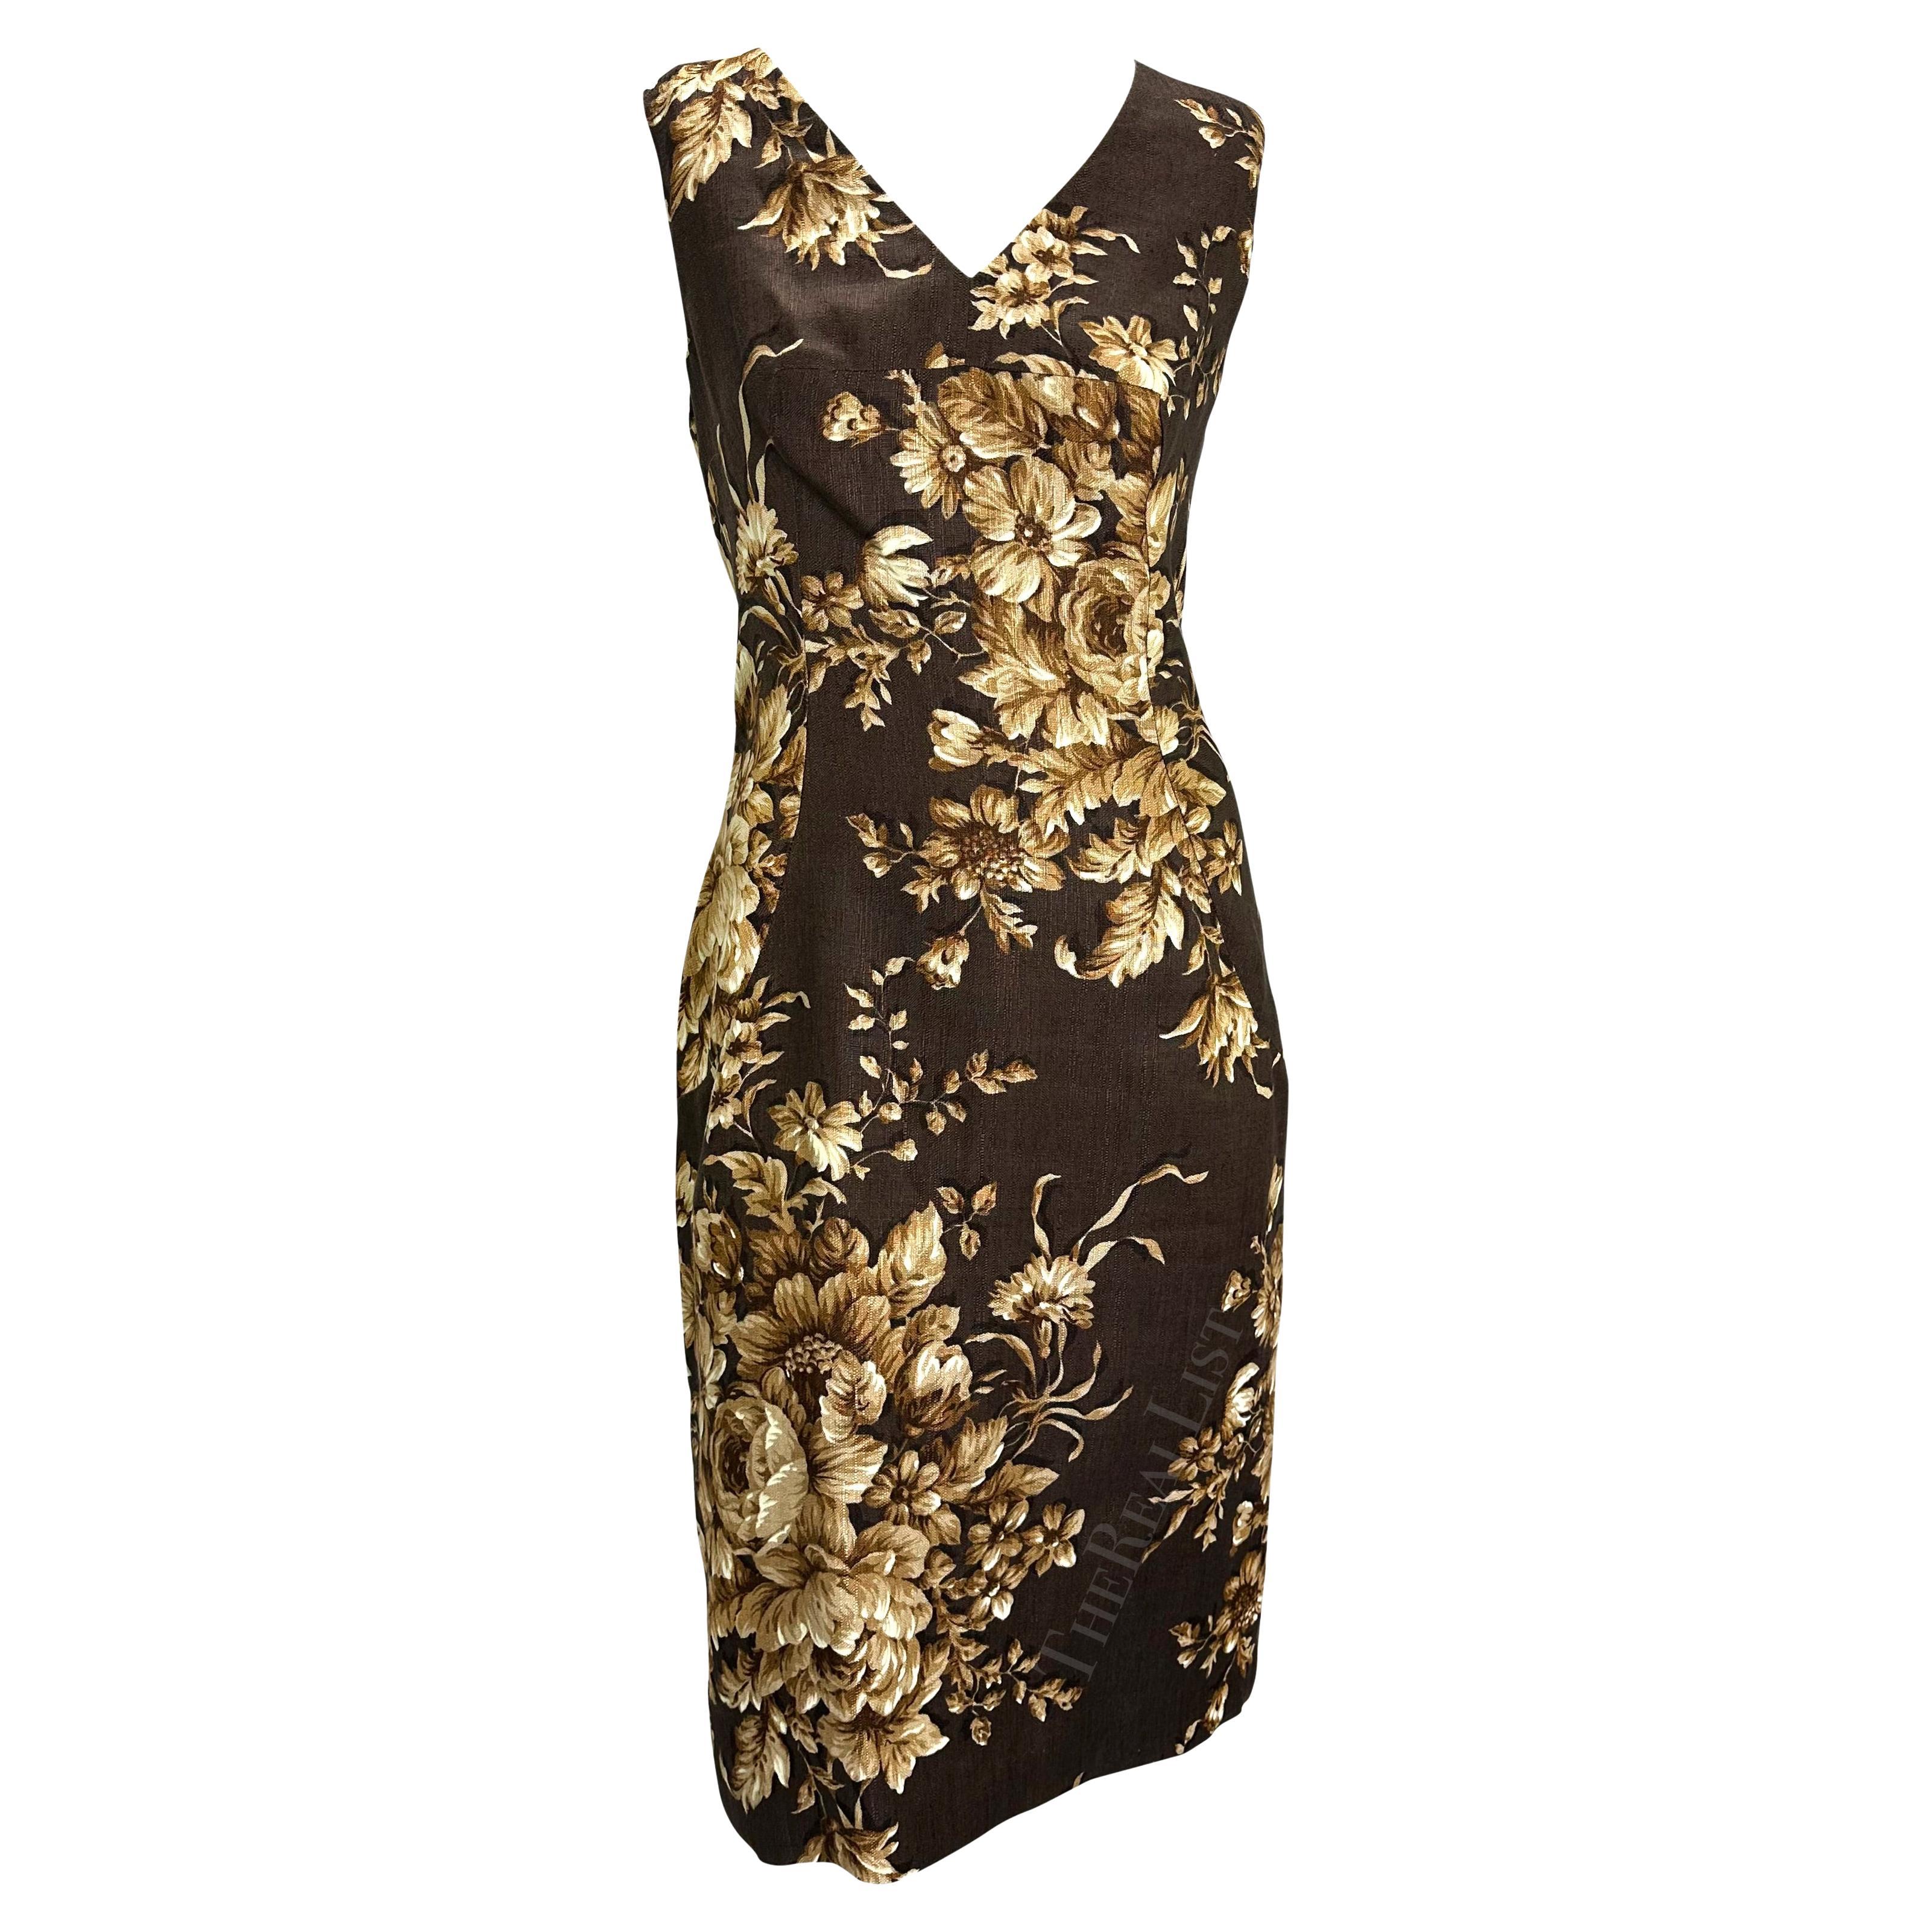 S/S 1997 Dolce & Gabbana Runway Brown Beige Floral Sleeveless Dress For Sale